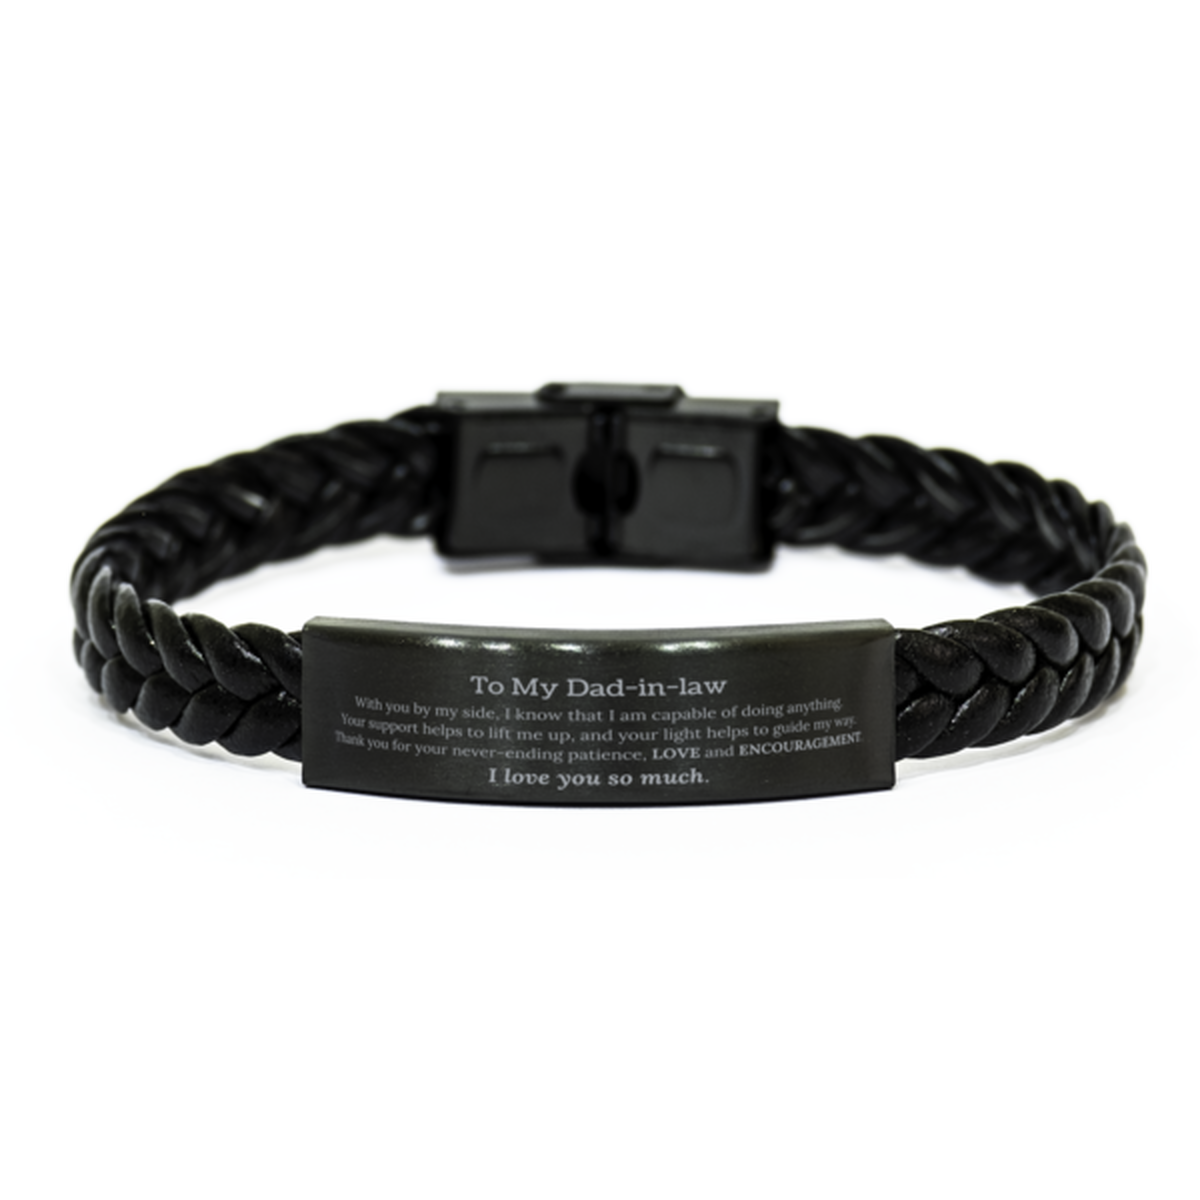 Appreciation Dad-in-law Braided Leather Bracelet Gifts, To My Dad-in-law Birthday Christmas Wedding Keepsake Gifts for Dad-in-law With you by my side, I know that I am capable of doing anything. I love you so much